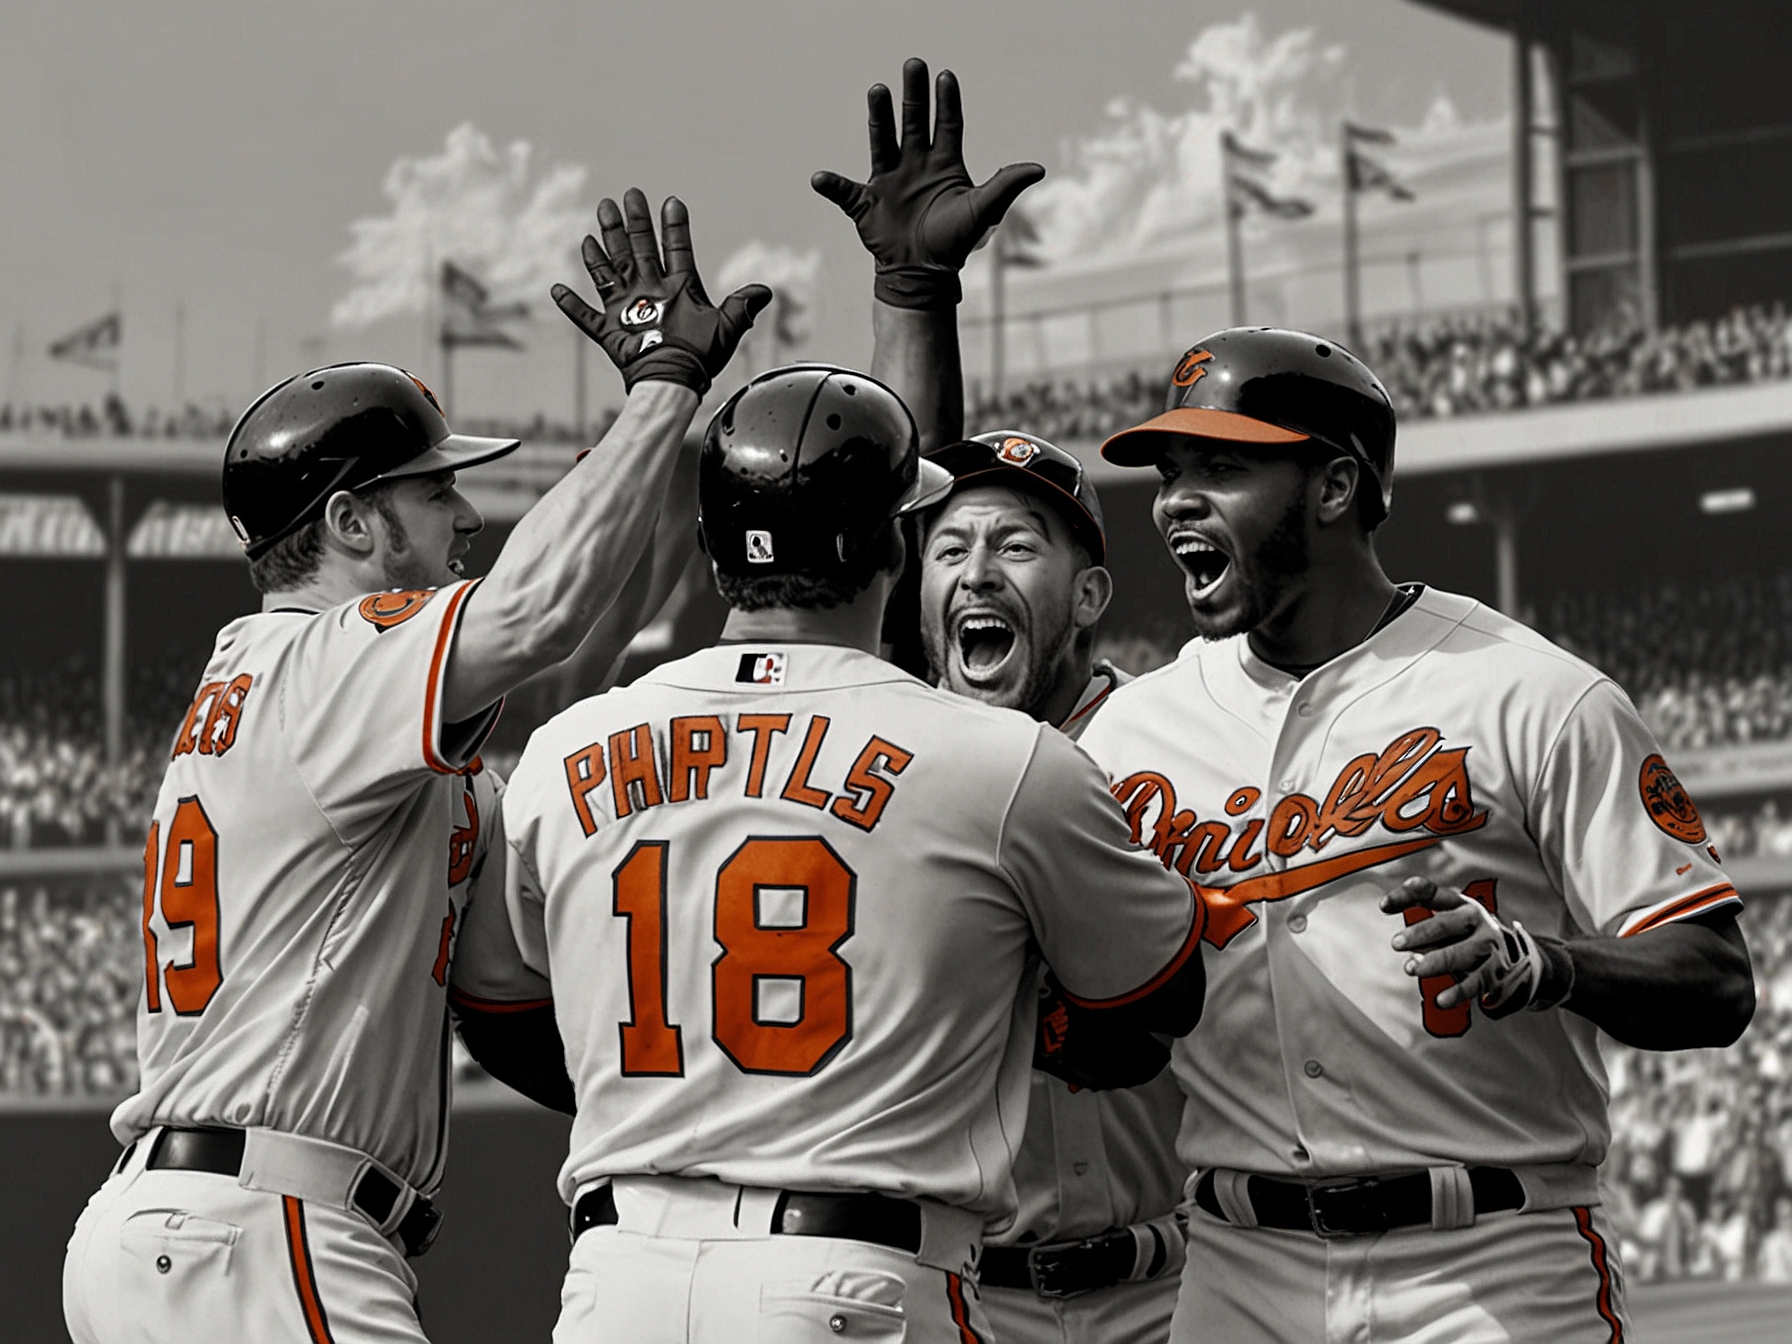 Orioles players celebrate their series-clinching victory against the Phillies, highlighting their explosive offensive and solid defensive performances.